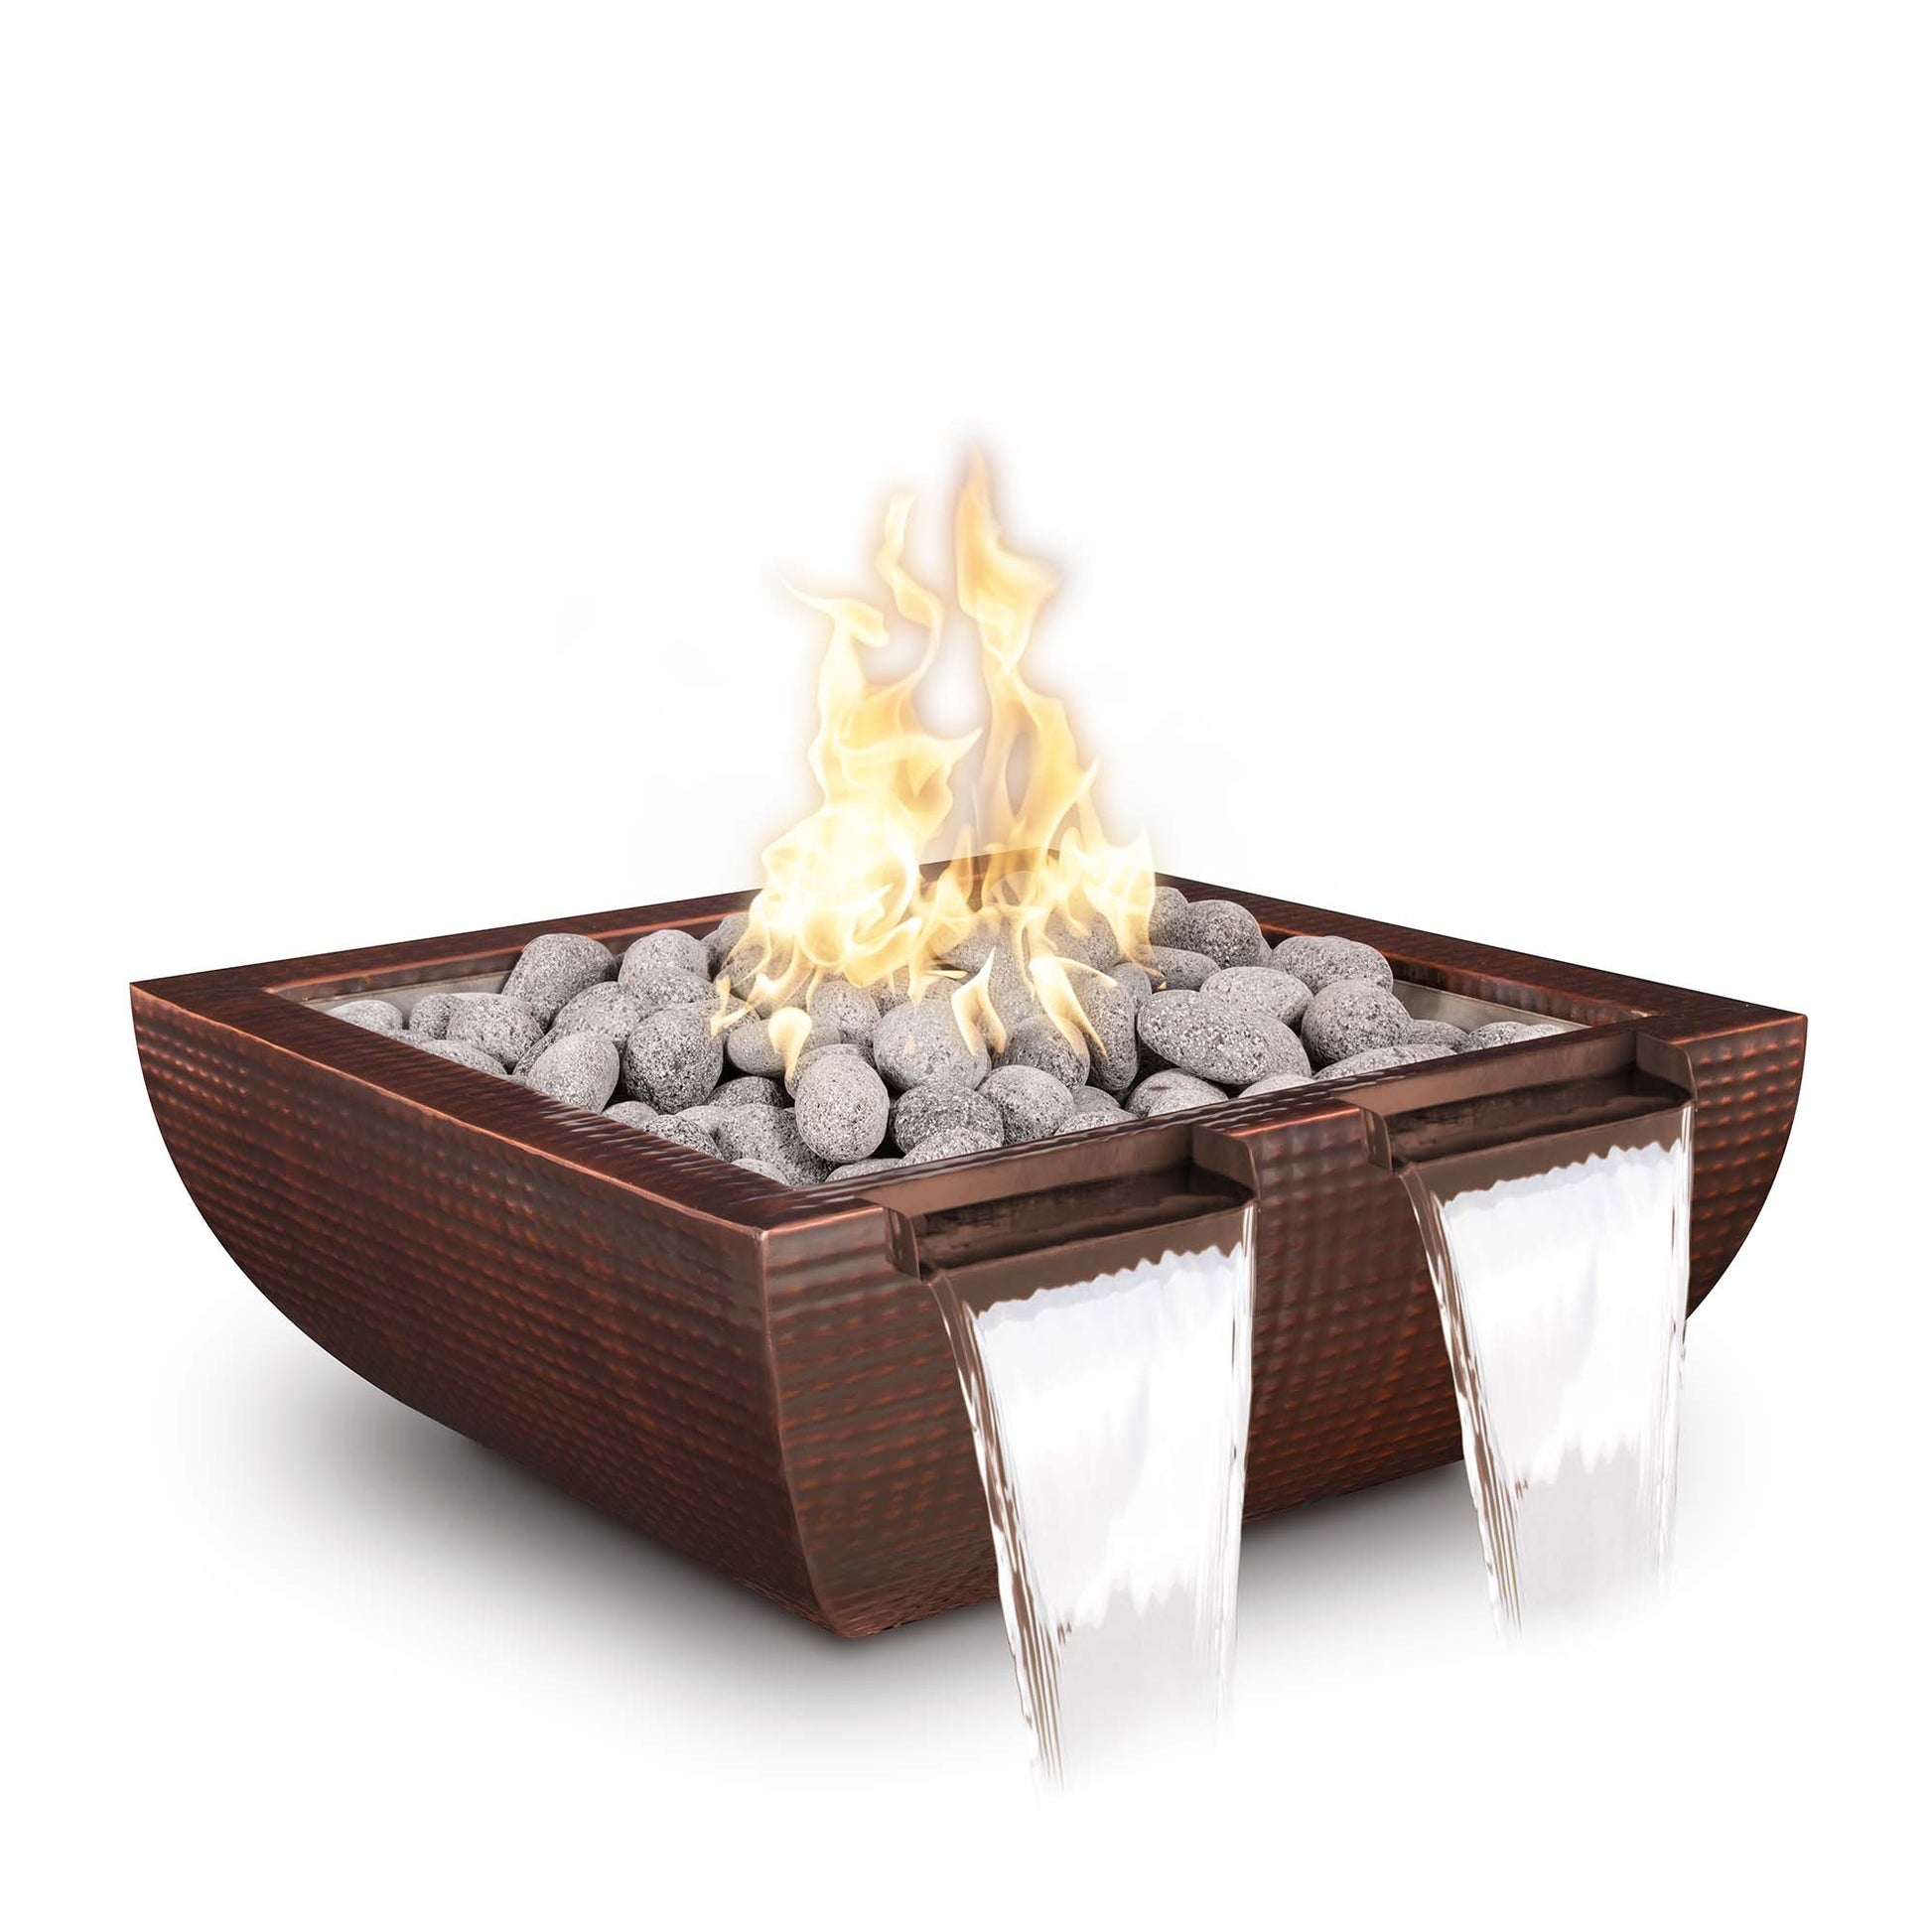 The Outdoor Plus Avalon Twin Spill 30" Black Powder Coated Metal Natural Gas Fire & Water Bowl with Match Lit Ignition